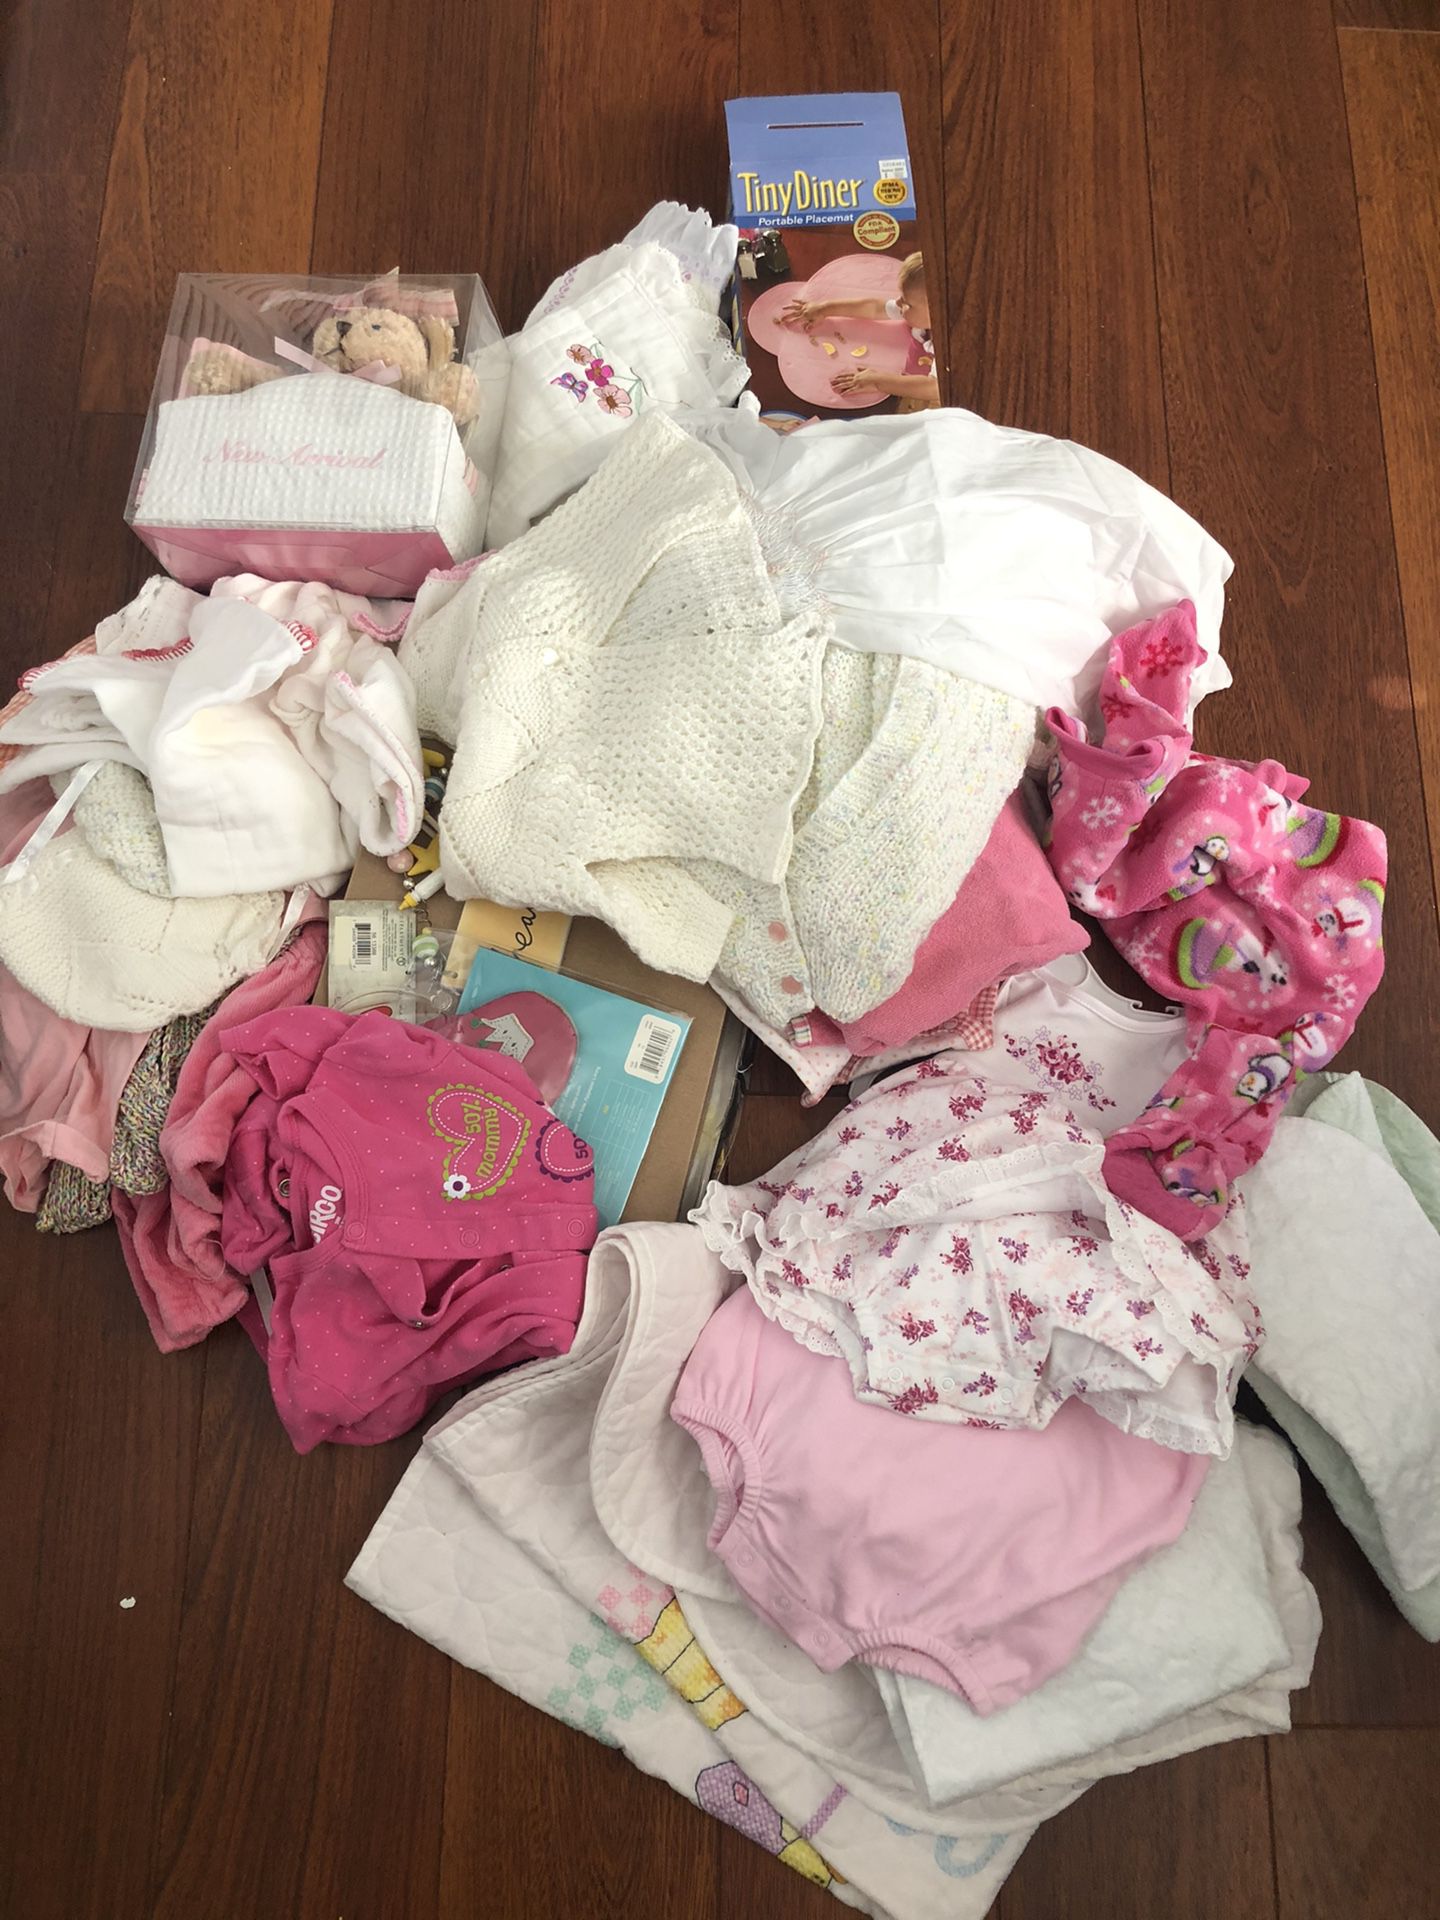 Newborn Baby girl items, free, pick up in Coral Springs